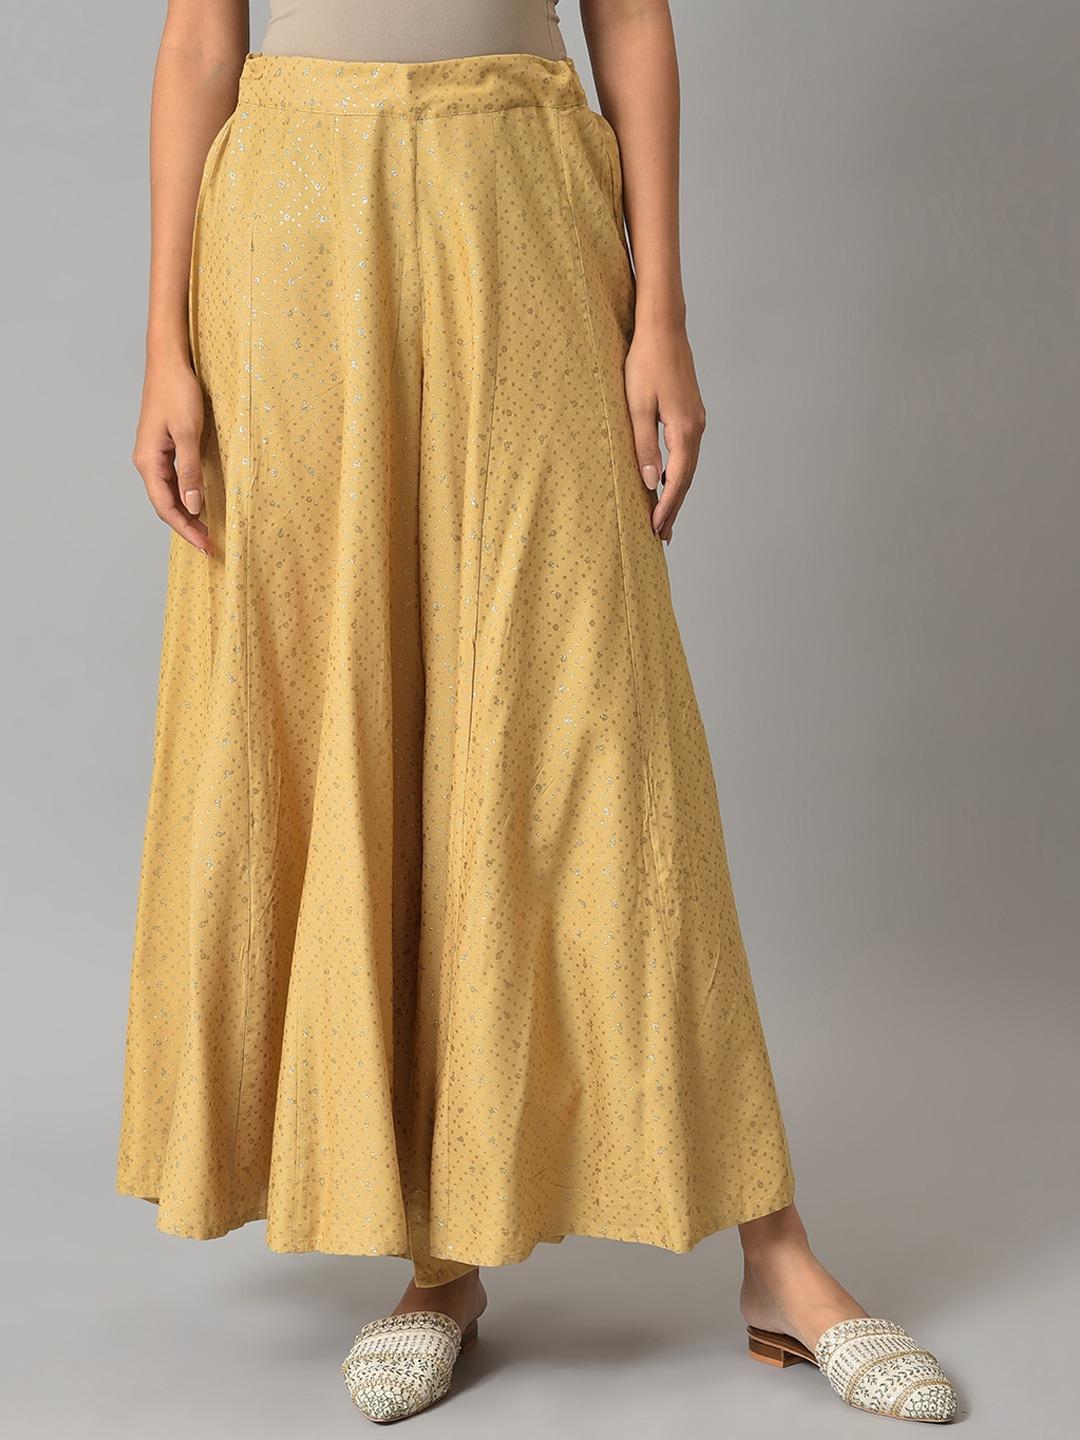 W Women Golden Colored Glitter Printed Flared Maxi Skirts